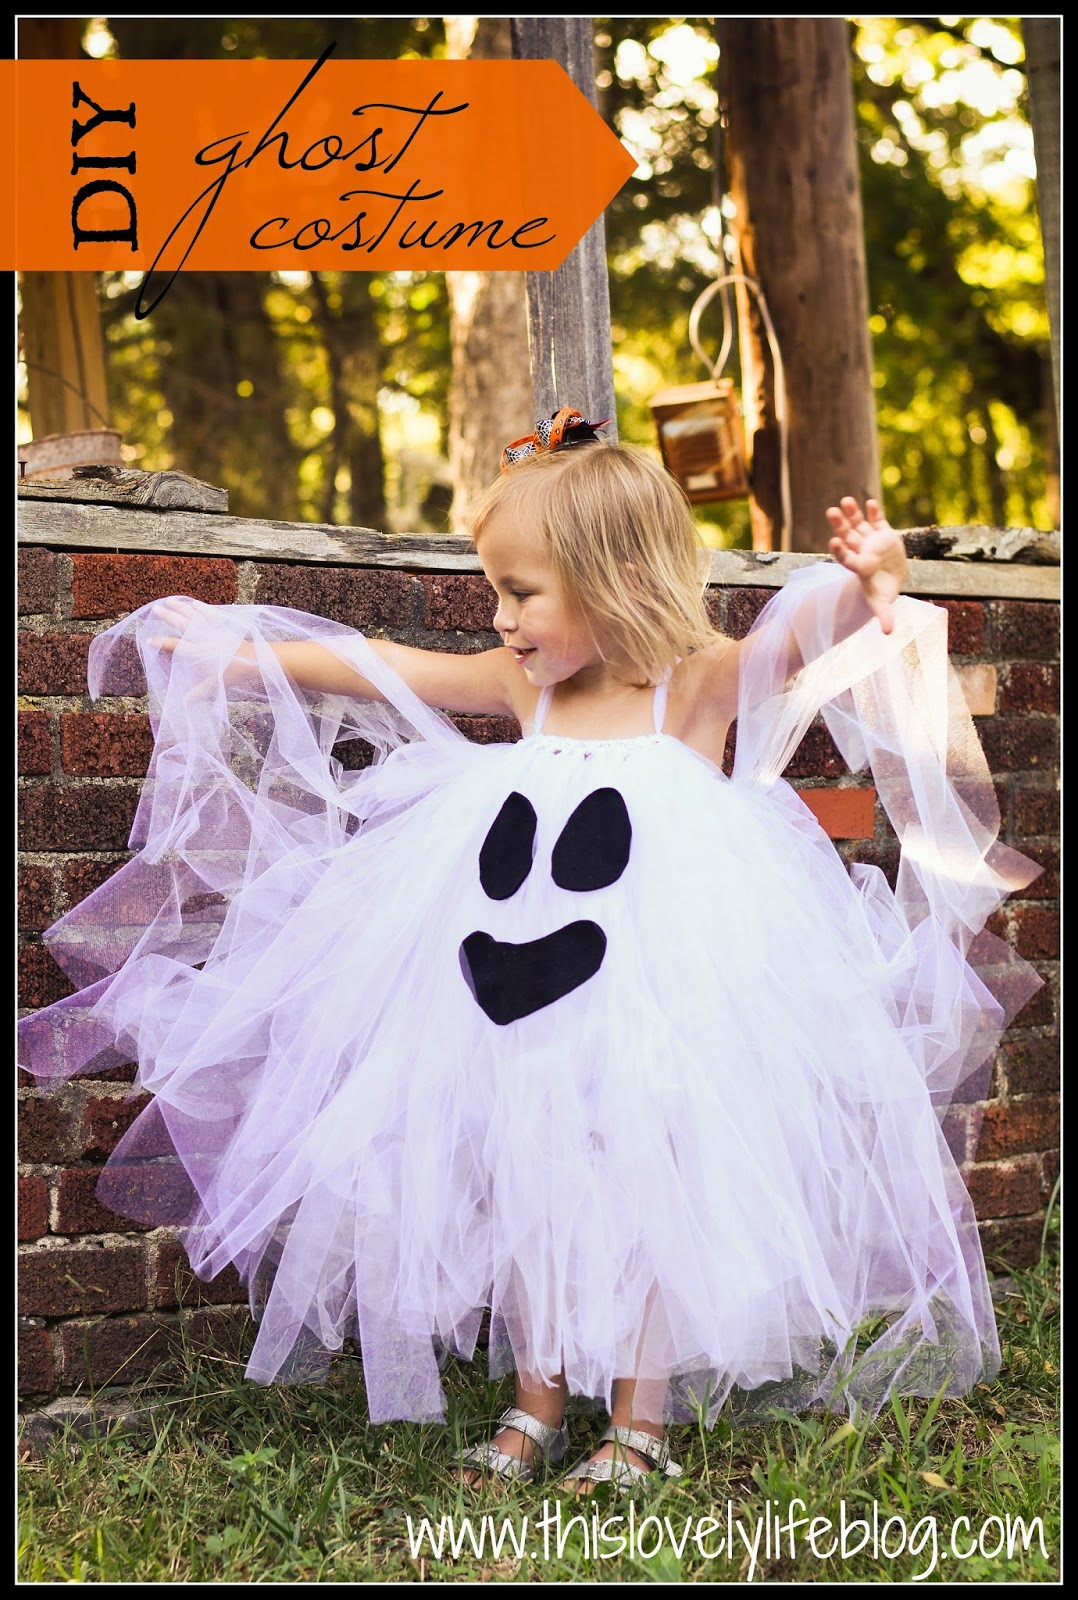 DIY Ghost Costume
 This Lovely Life DIY GHOST COSTUME